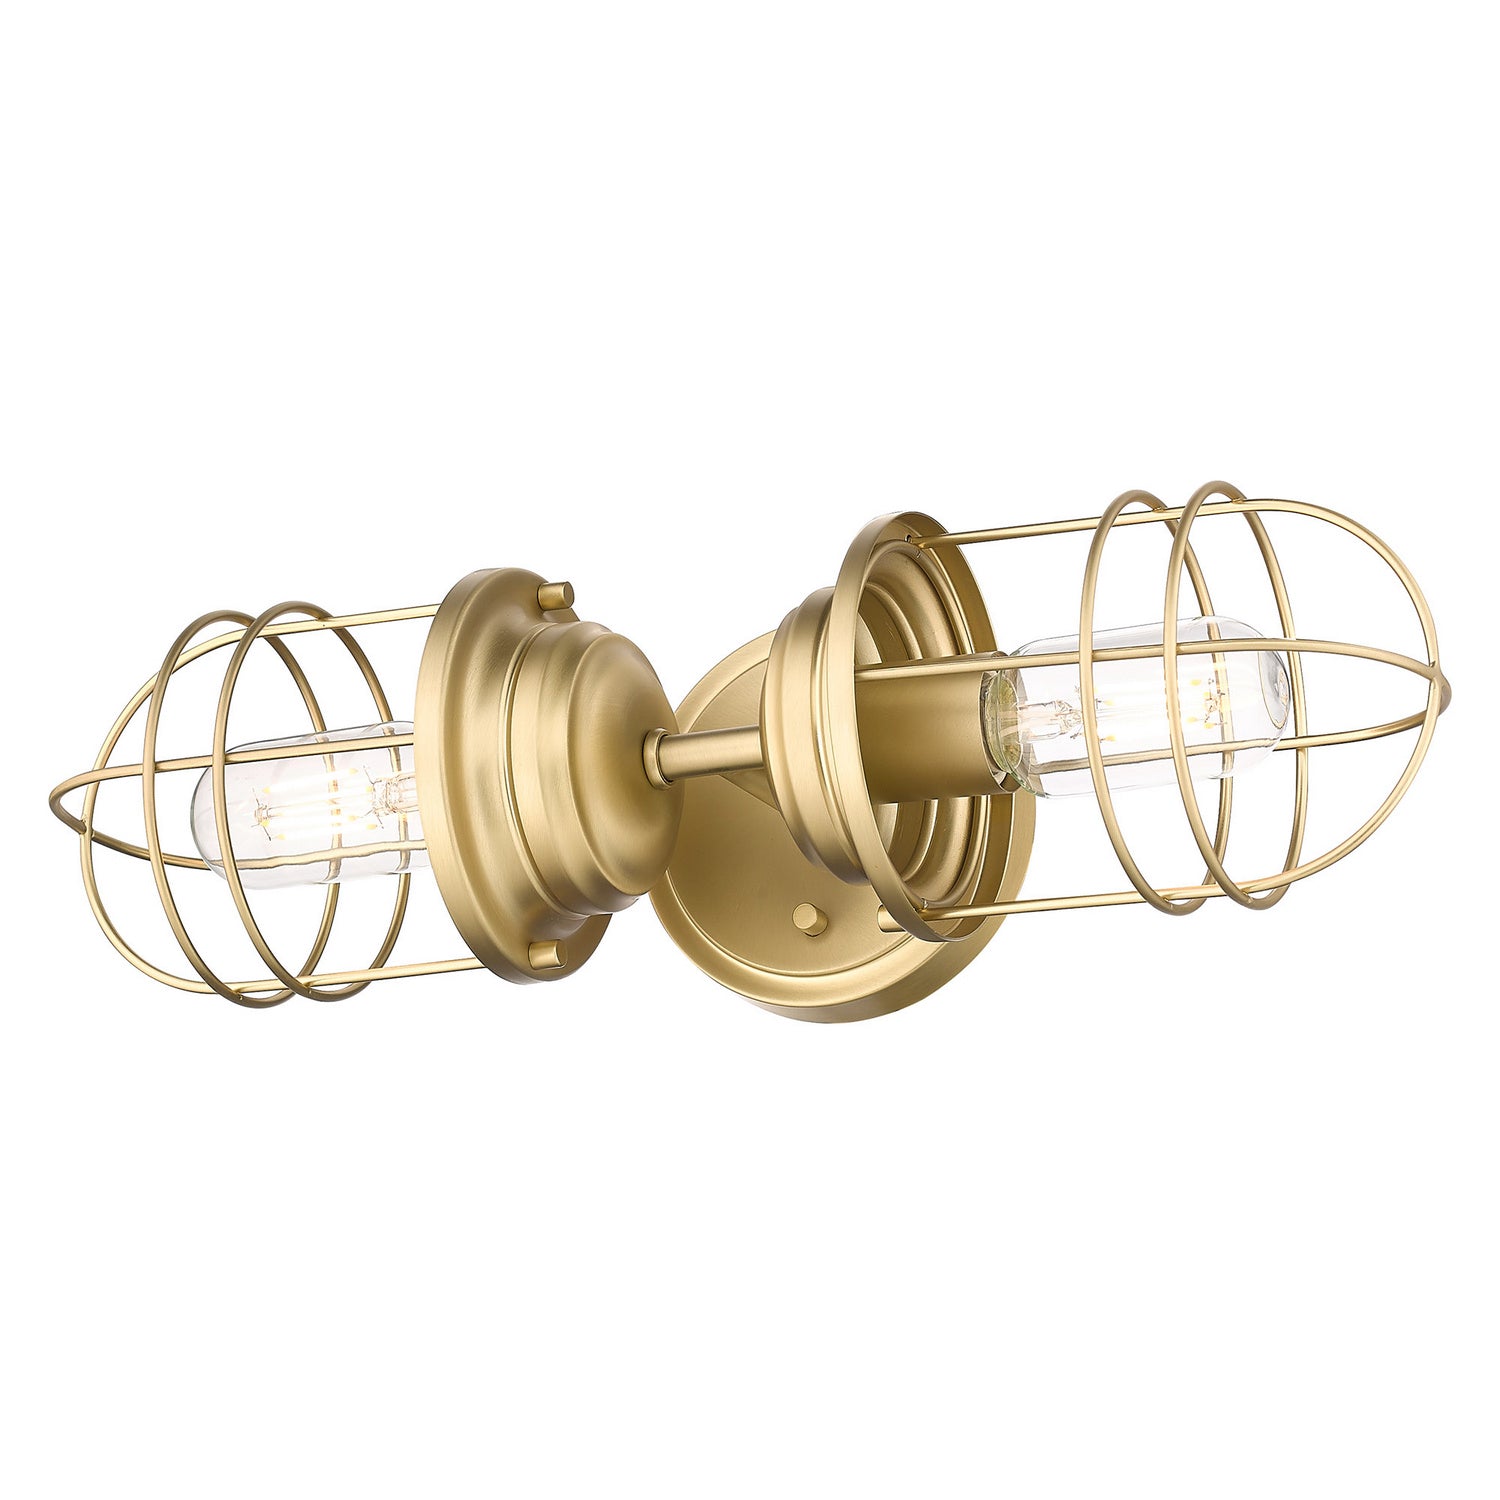 Golden - 9808-2W BCB - Two Light Wall Sconce - Seaport BCB - Brushed Champagne Bronze